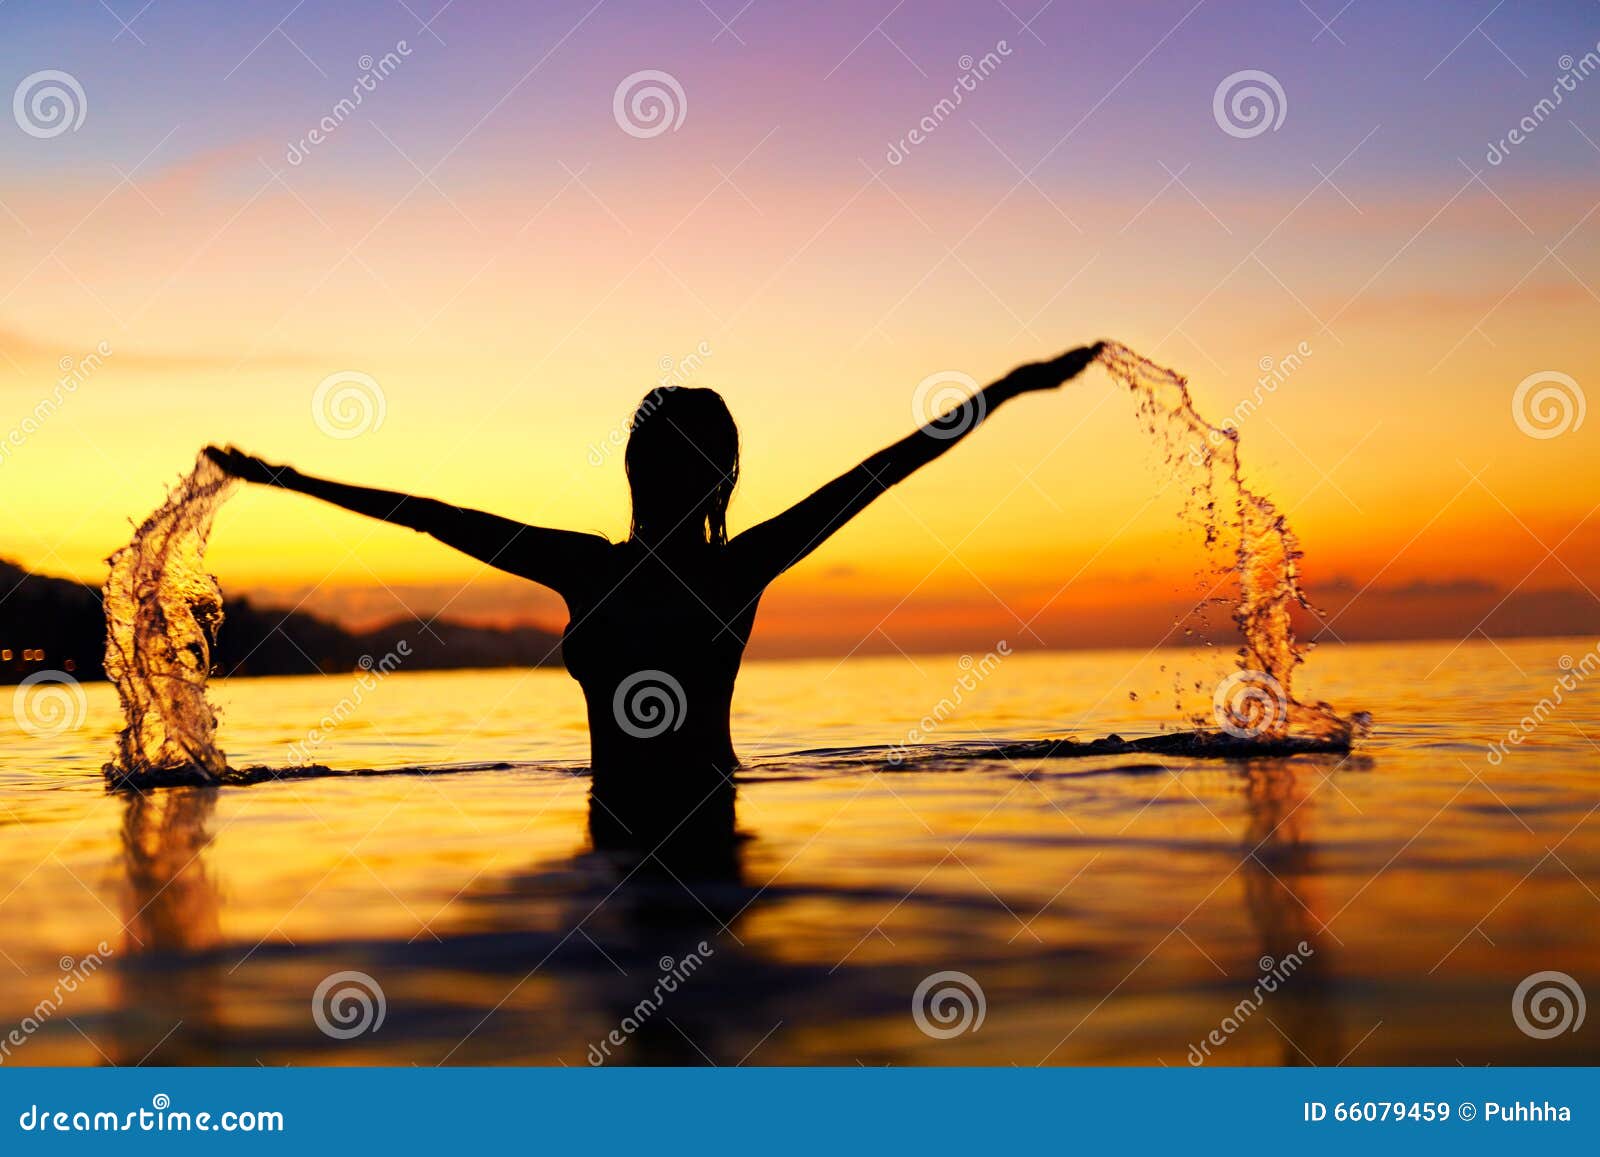 freedom, enjoyment. woman in sea at sunset. happiness, healthy l